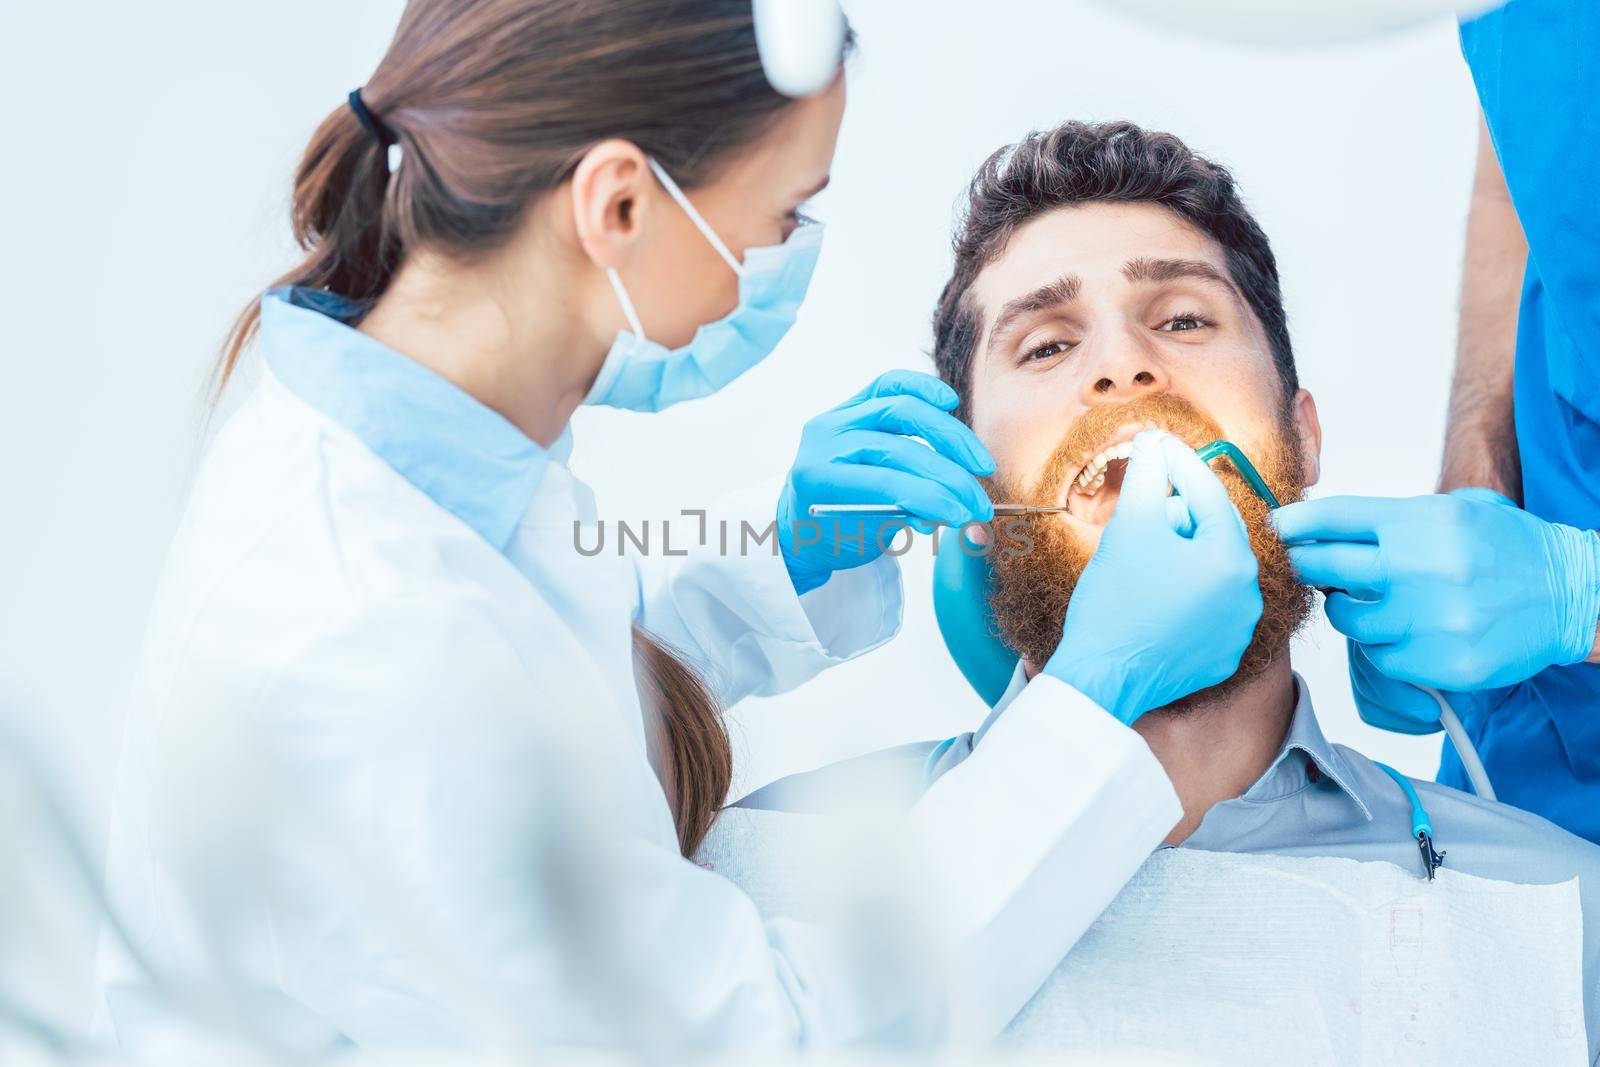 Young man during a painless oral procedure in the dental office by Kzenon